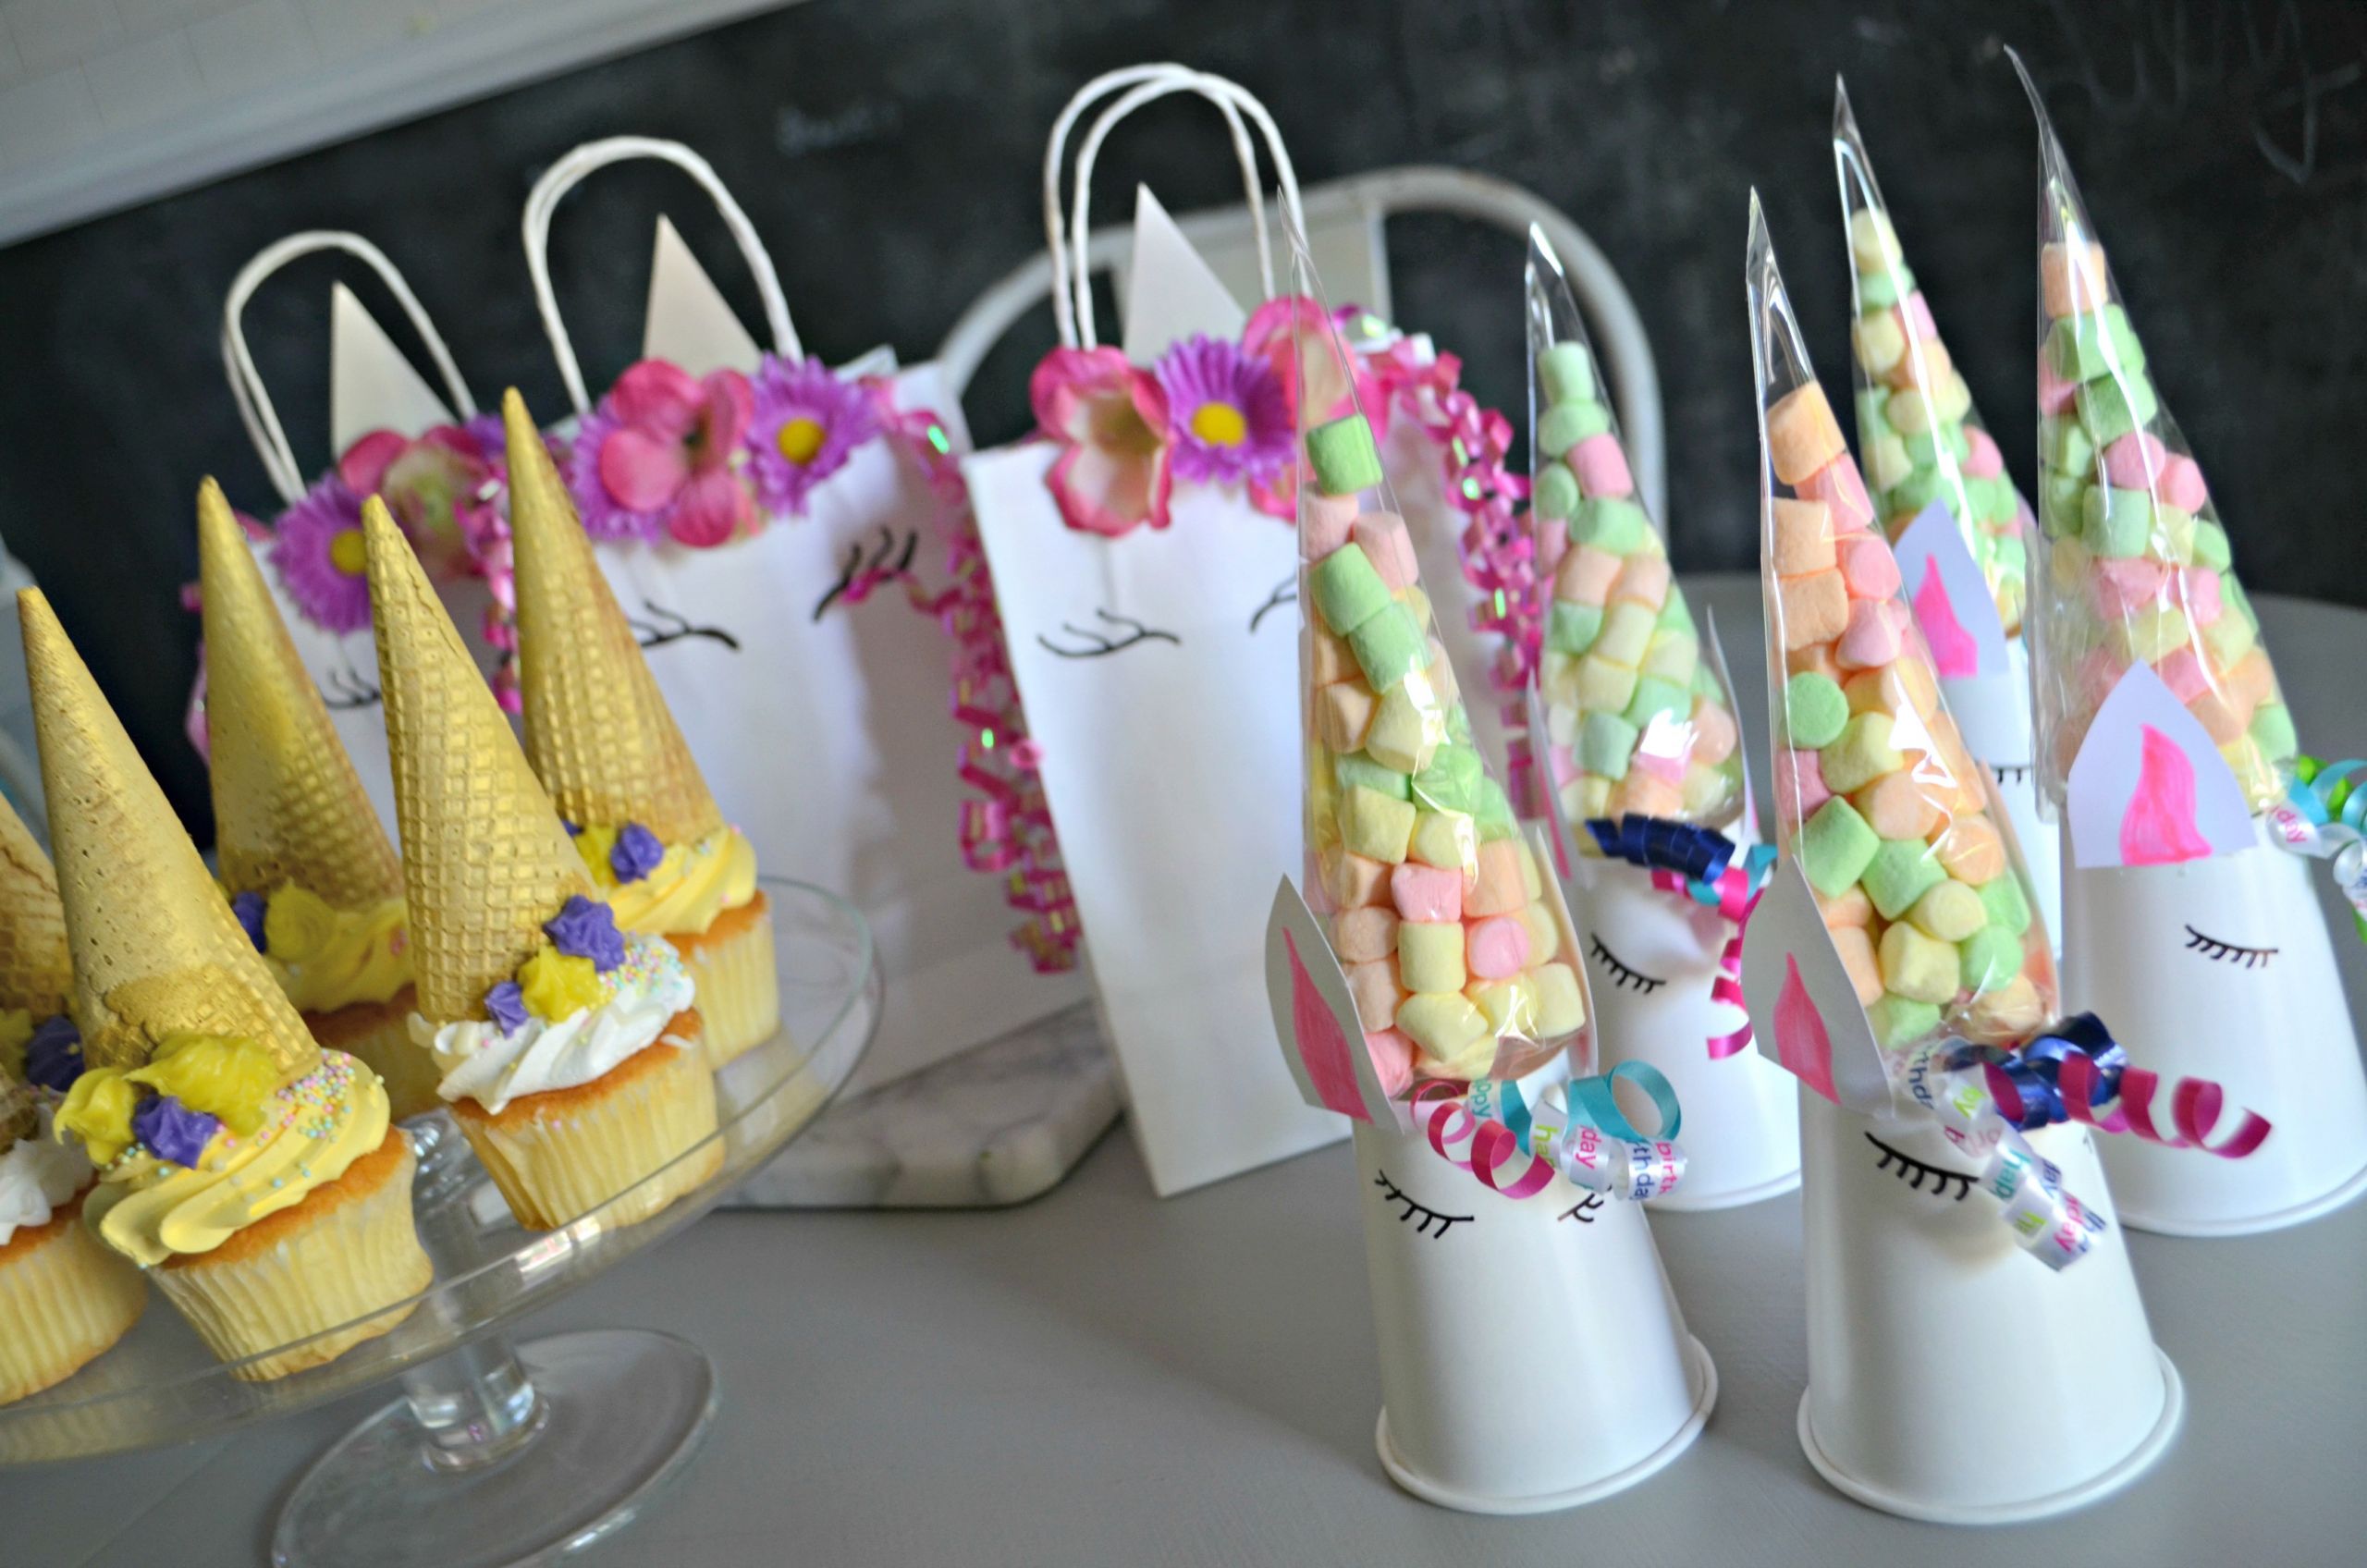 Unicorn Party Ideas On A Budget
 Top 10 Unicorn Theme Party Ideas and Tips